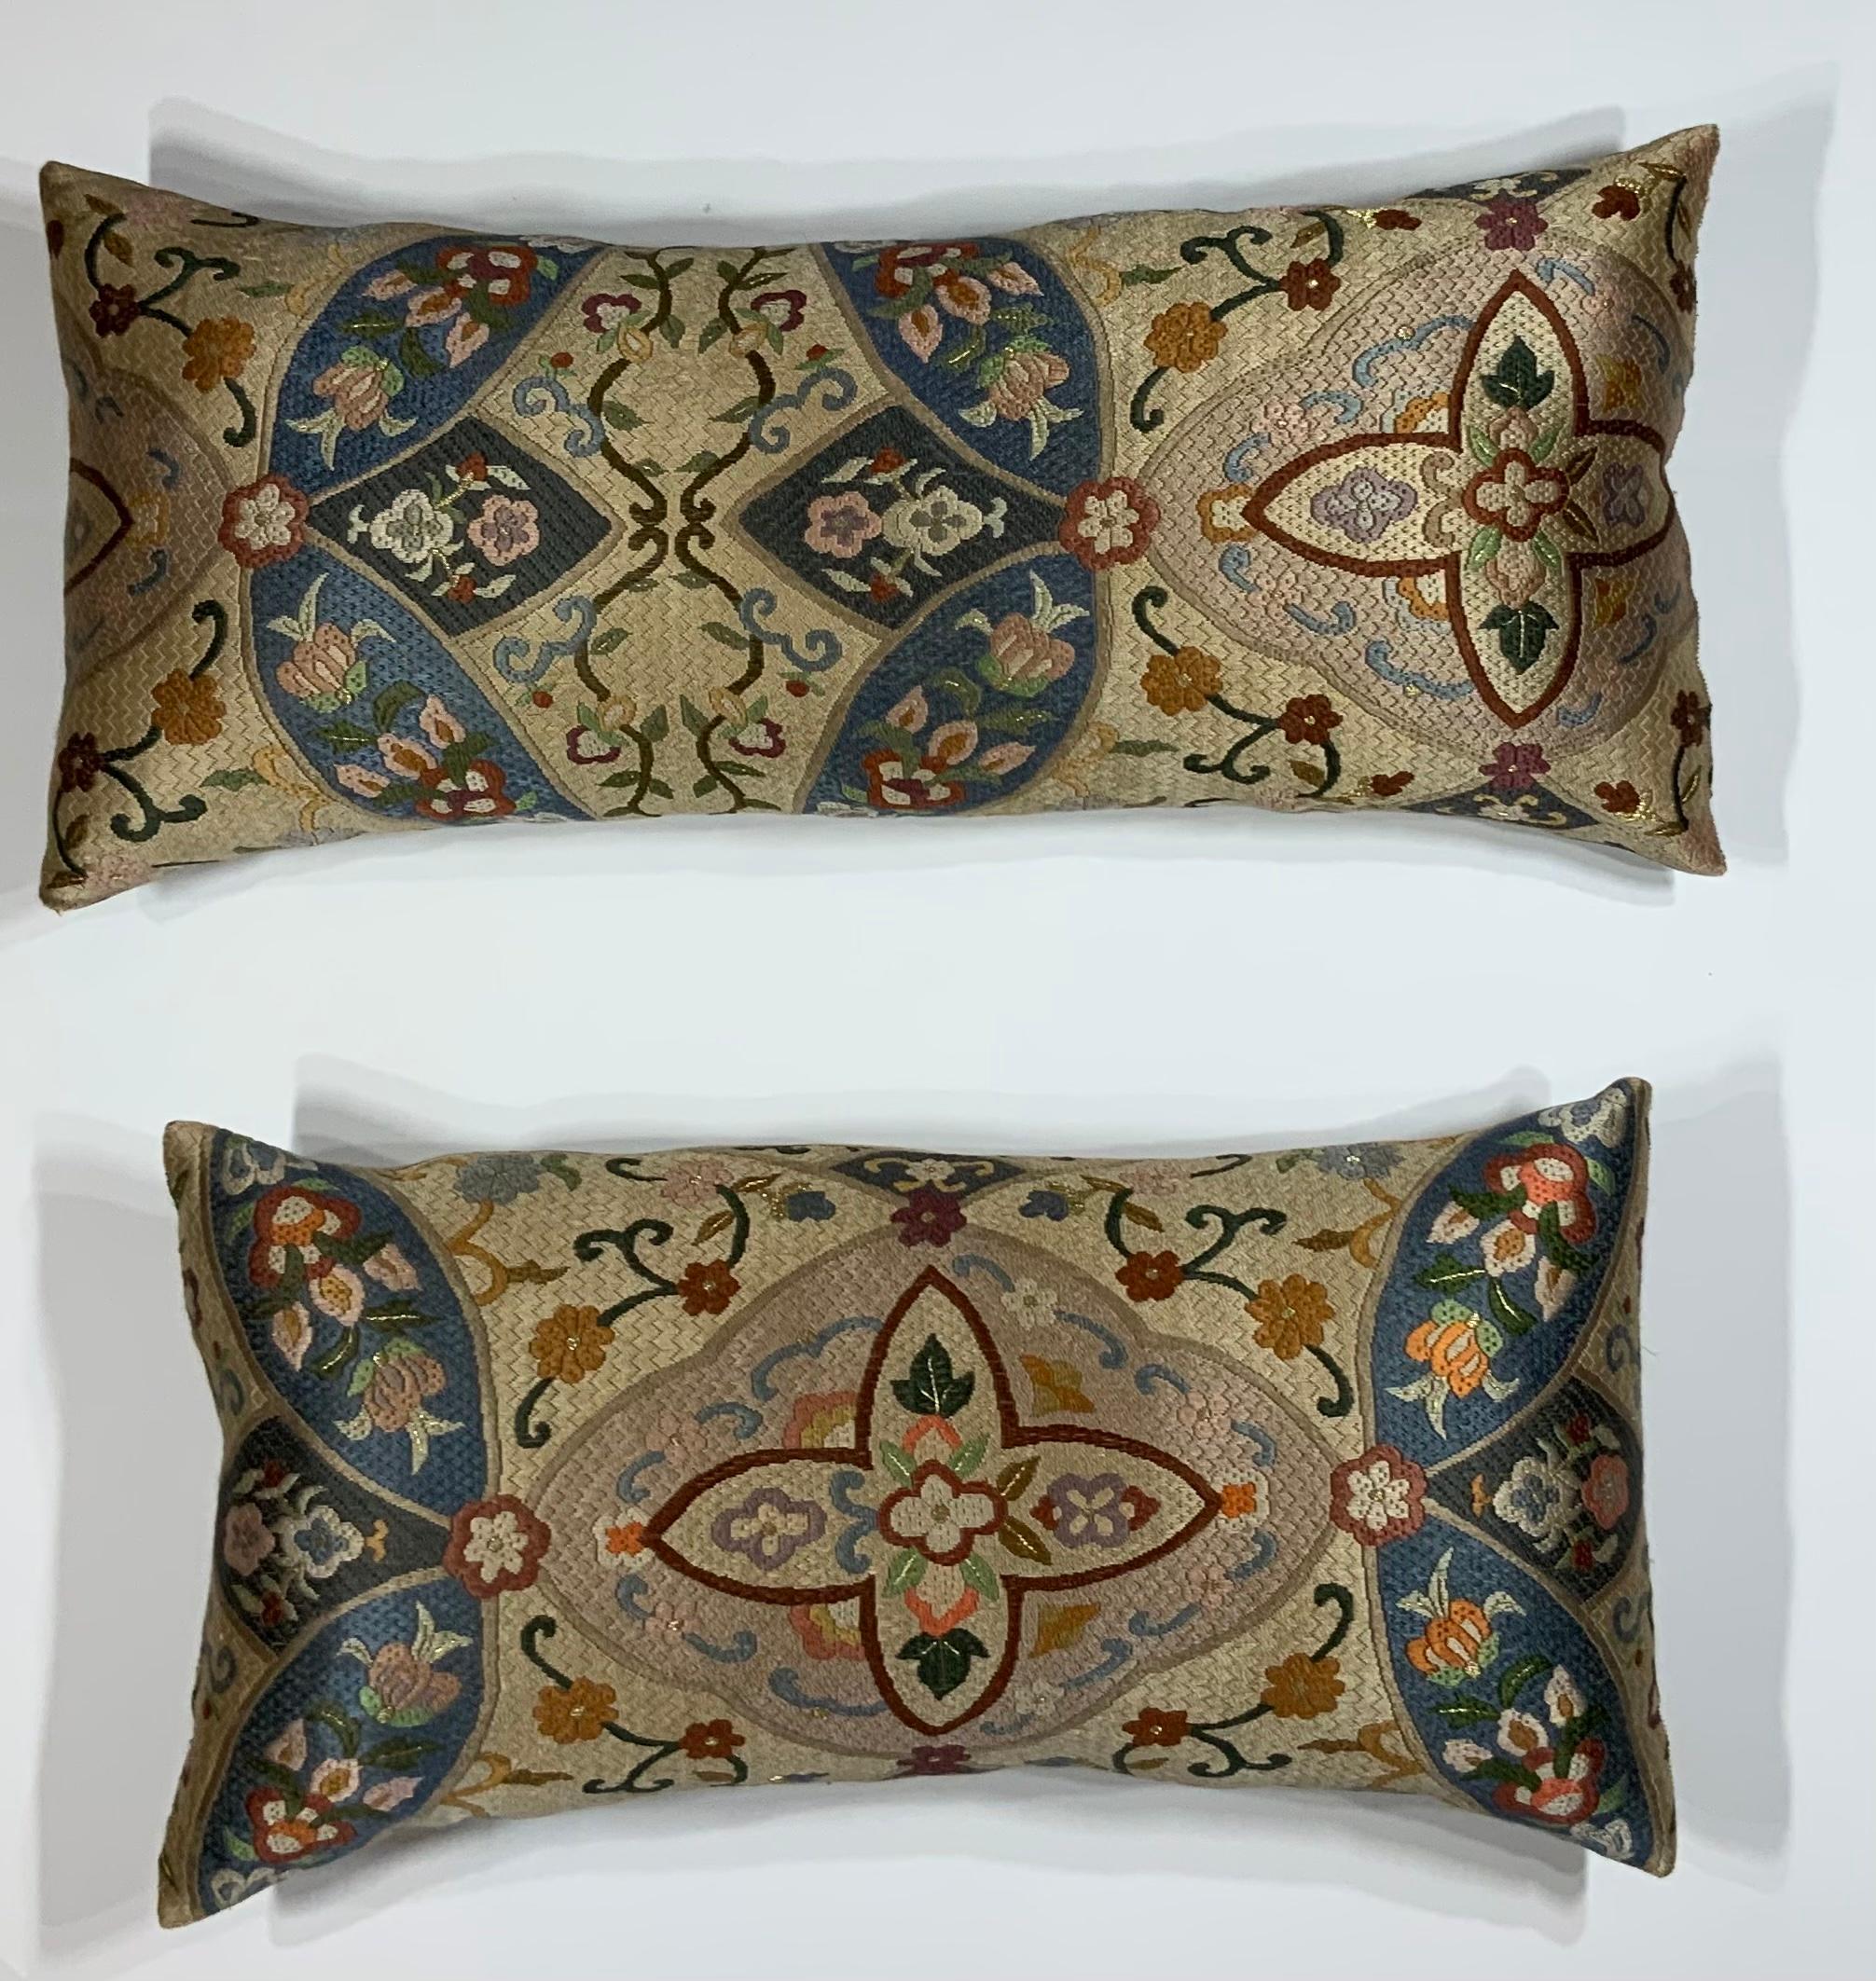 Pair of beautiful pillows made of silk, exceptional motifs of circling vines and flowers, soft colors. Fresh new inserts.
Sizes: 23”.5 x 10”.5. 20” x 10”.5.